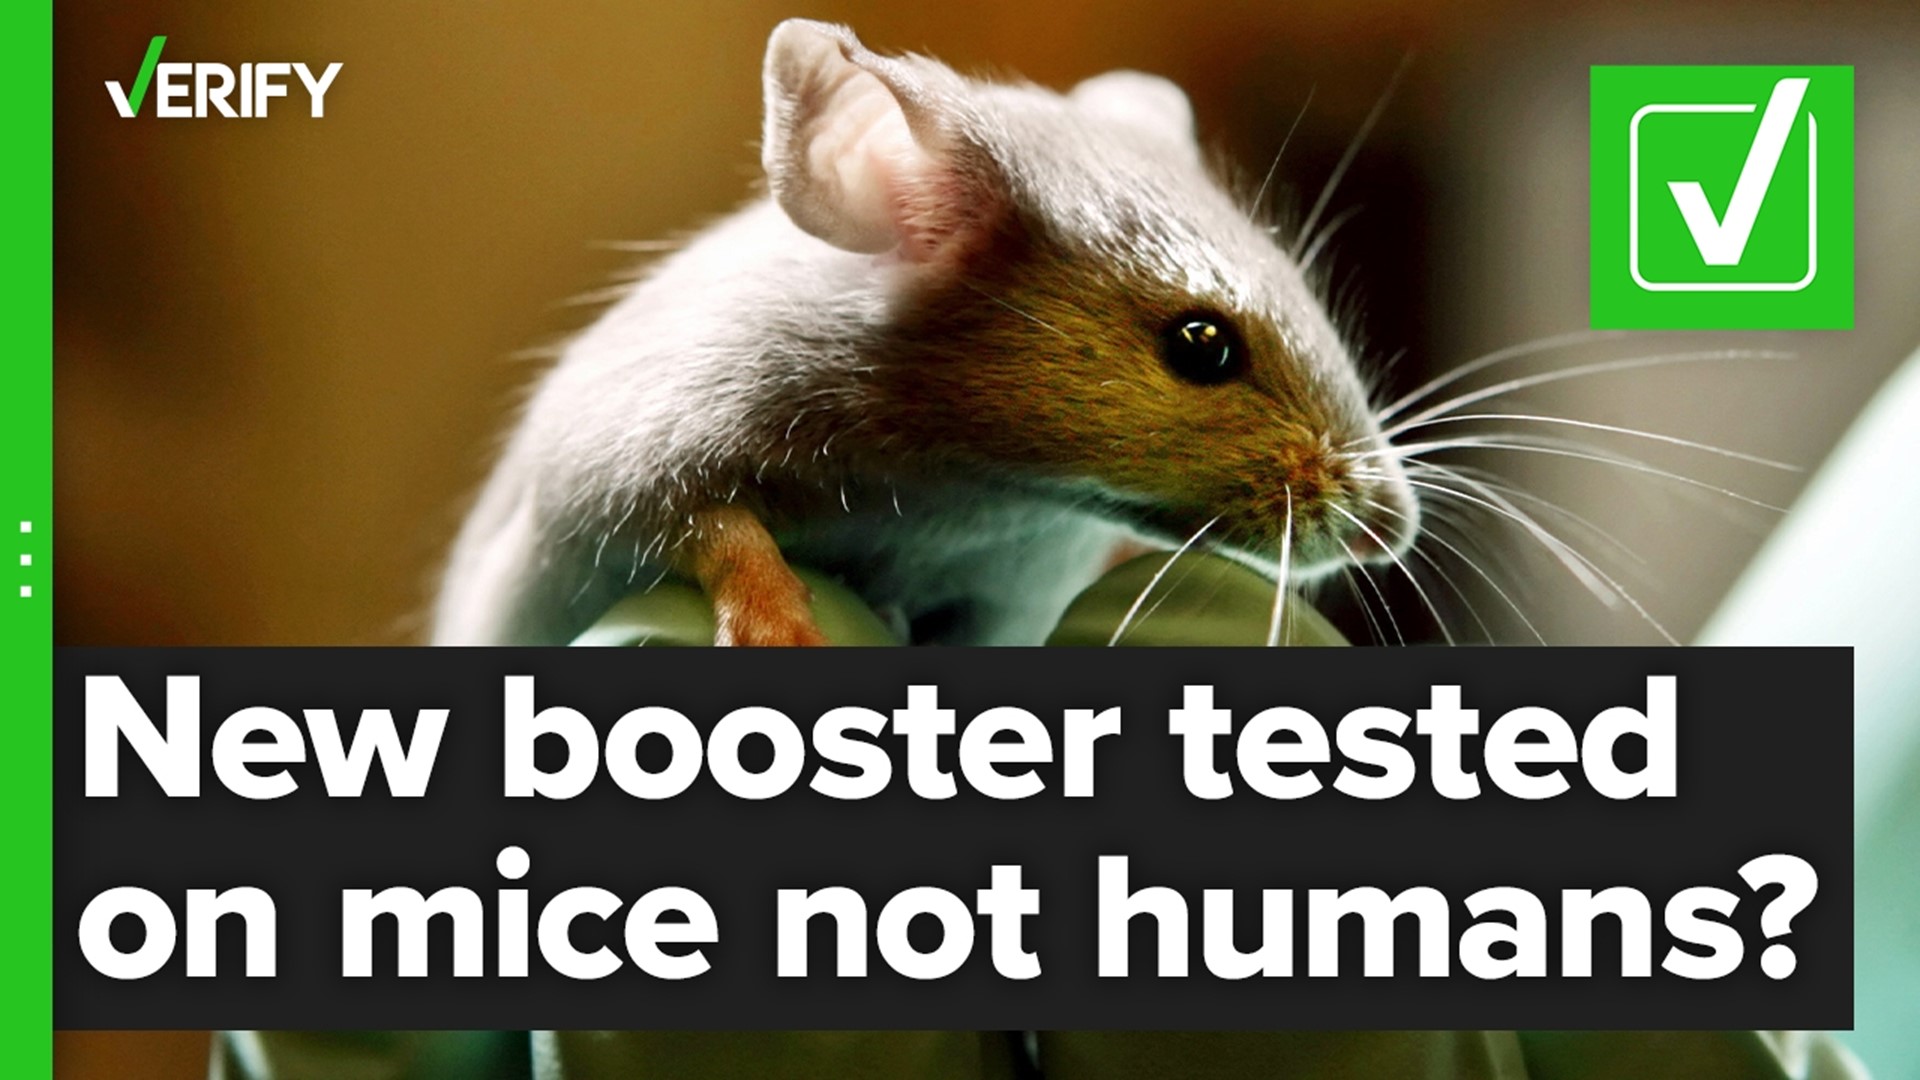 It’s true that the updated omicron boosters for BA.5 were only tested on mice, not humans, before FDA authorization. But experts say this isn’t uncommon.